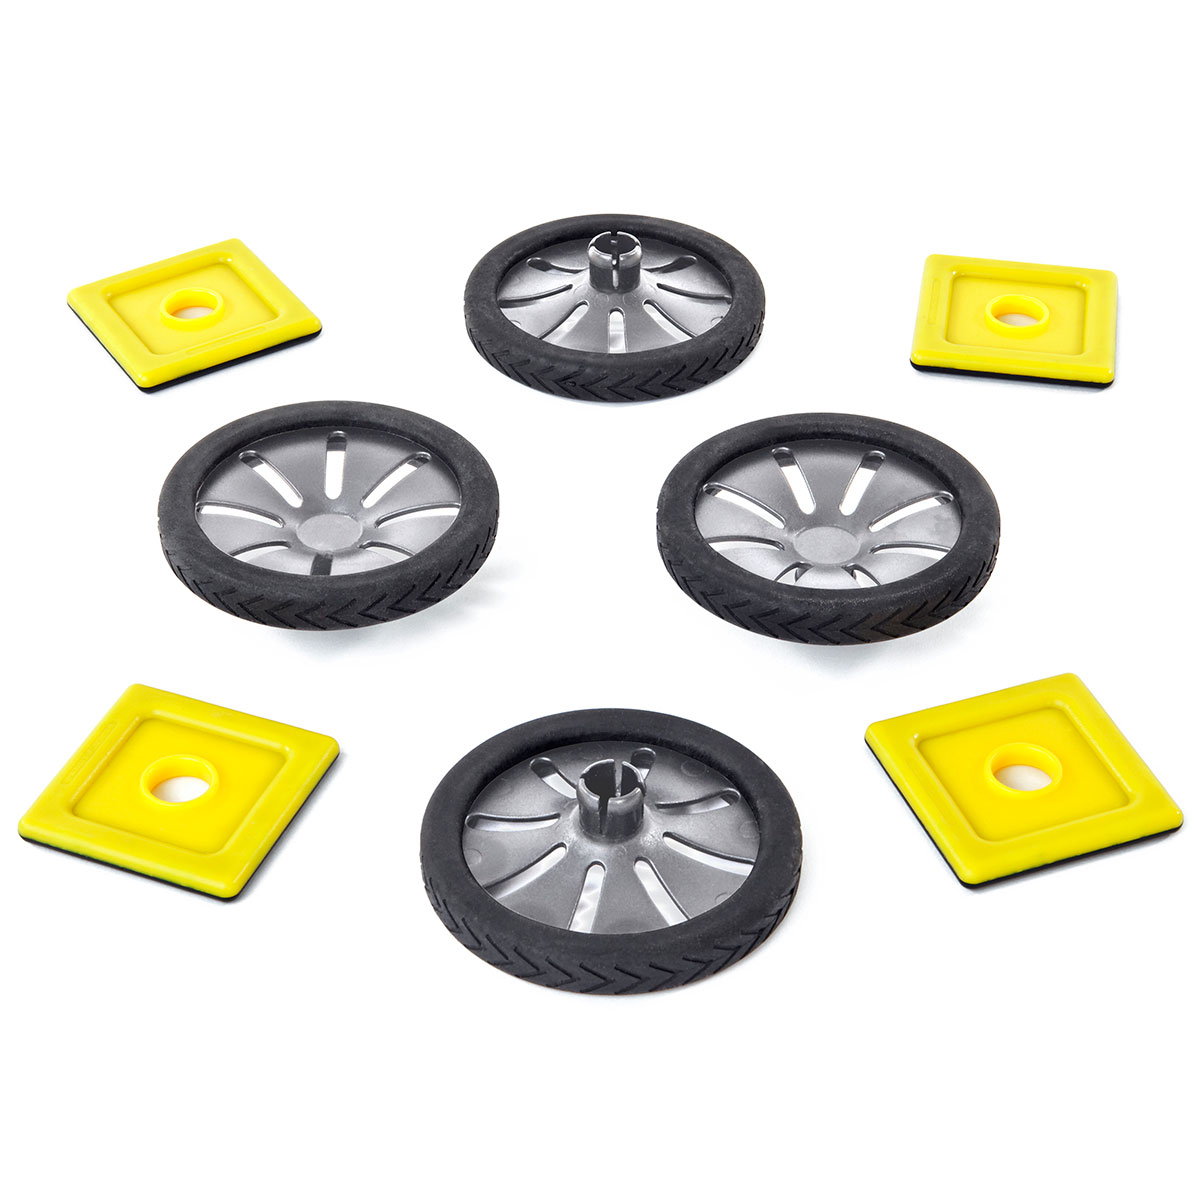 Magnetic Polydron Add-on Wheels